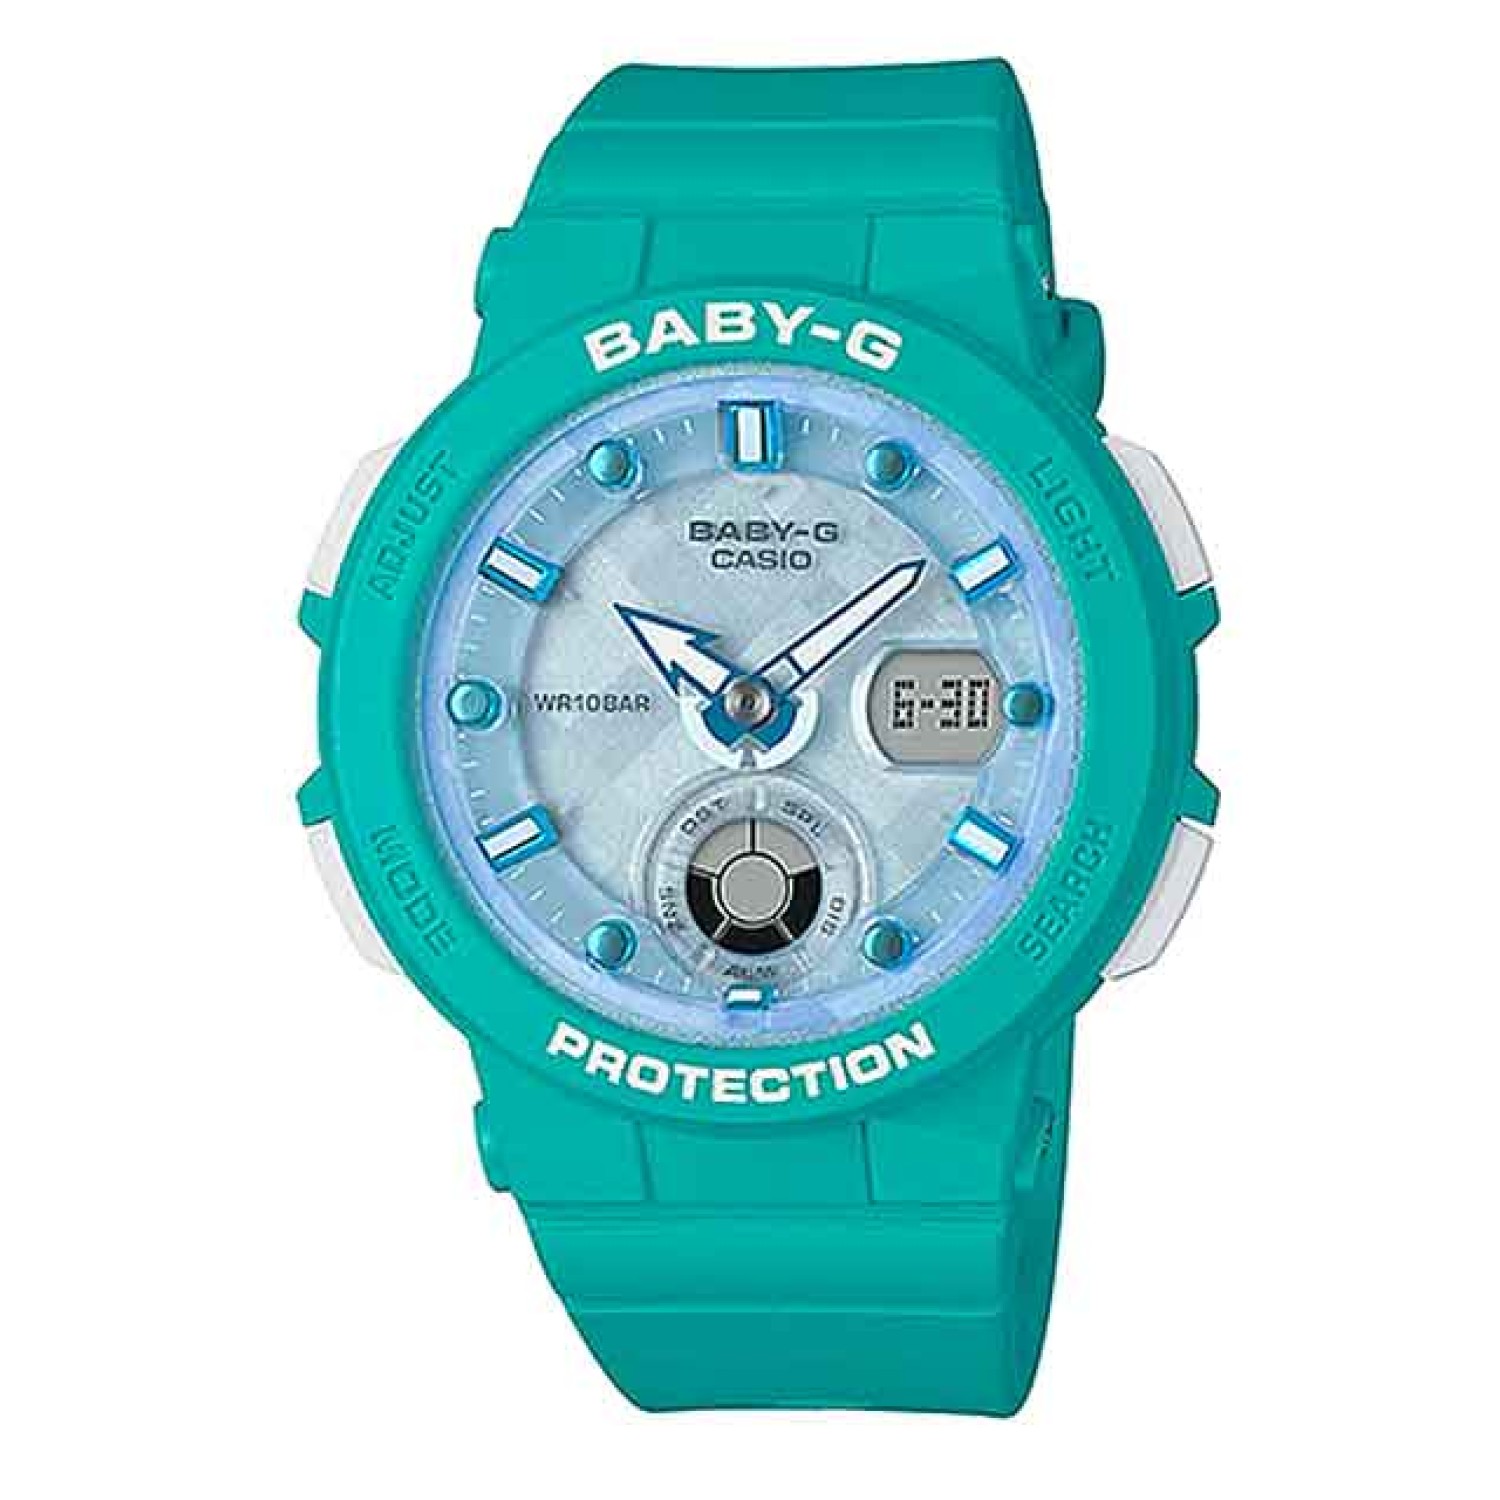 BGA250-2A Casio BabY-G  Beach Traveler Series. Introducing a new Beach Traveler Series of summer themed models from BABY-G, the casual watch for active women. Part of a series based on a theme that highlights the beauty of a summertime beach, these models